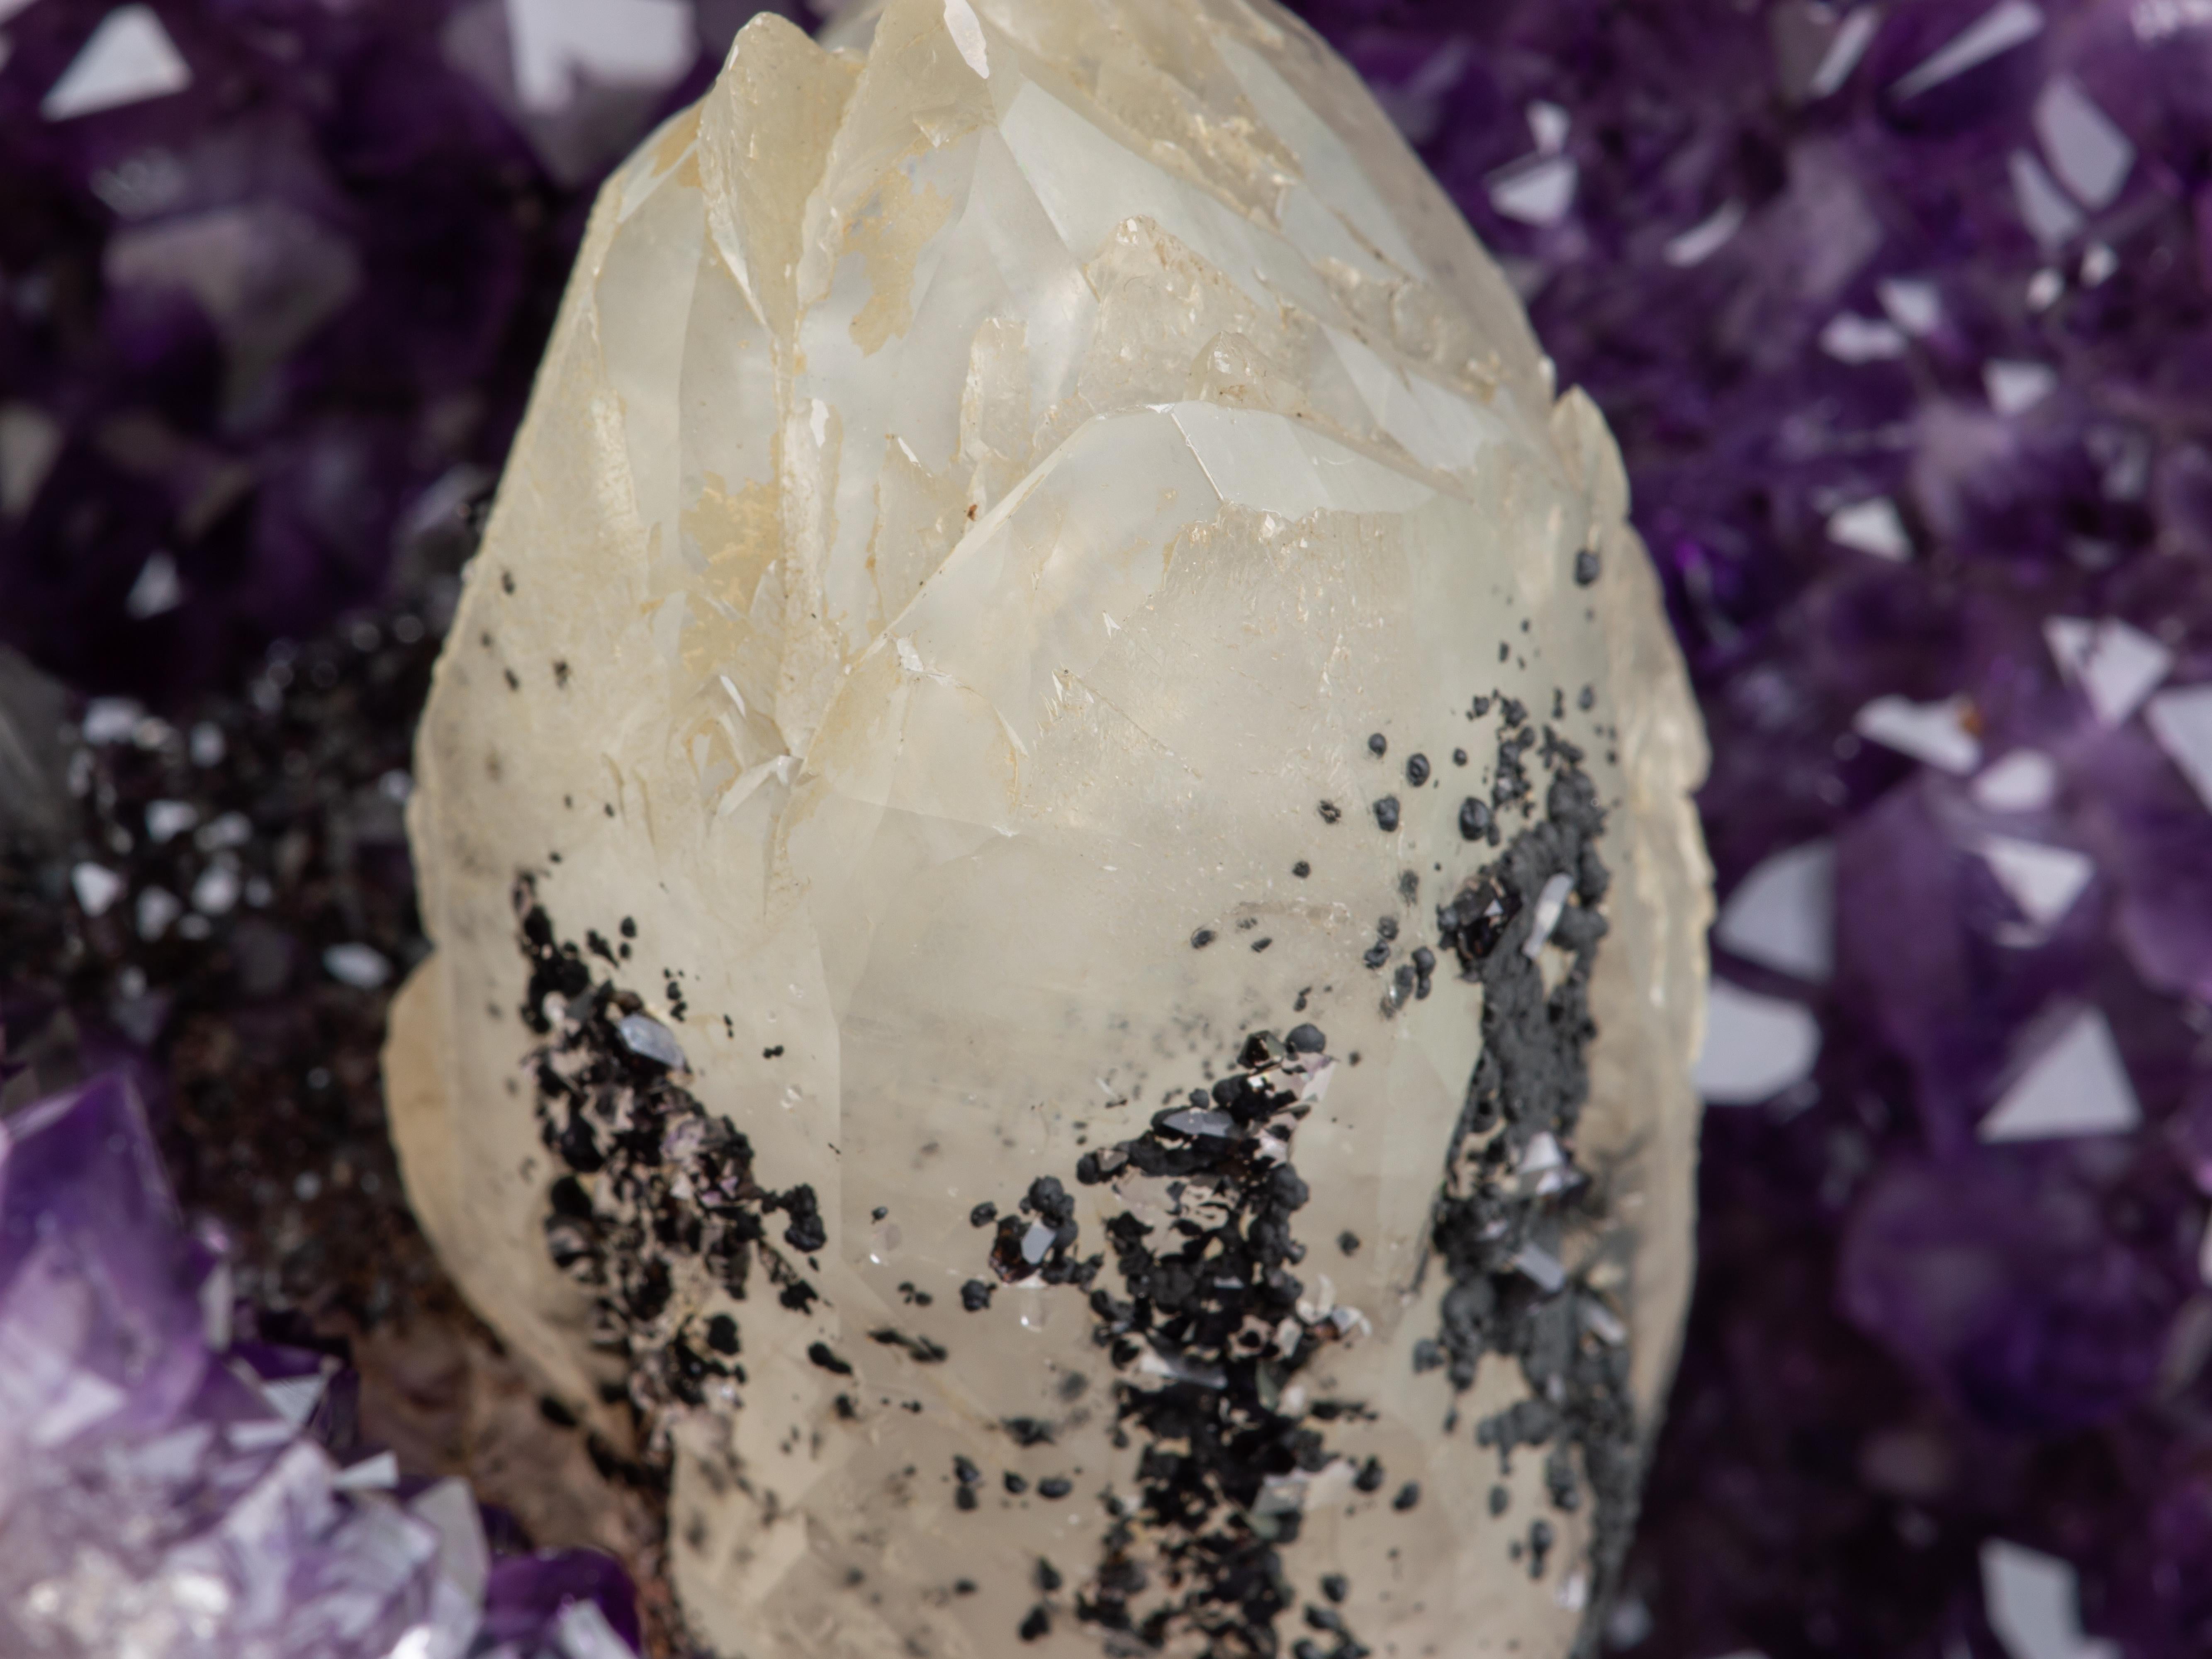 Angel Shaped Amethyst Crystals and Calcite mineral formation 3